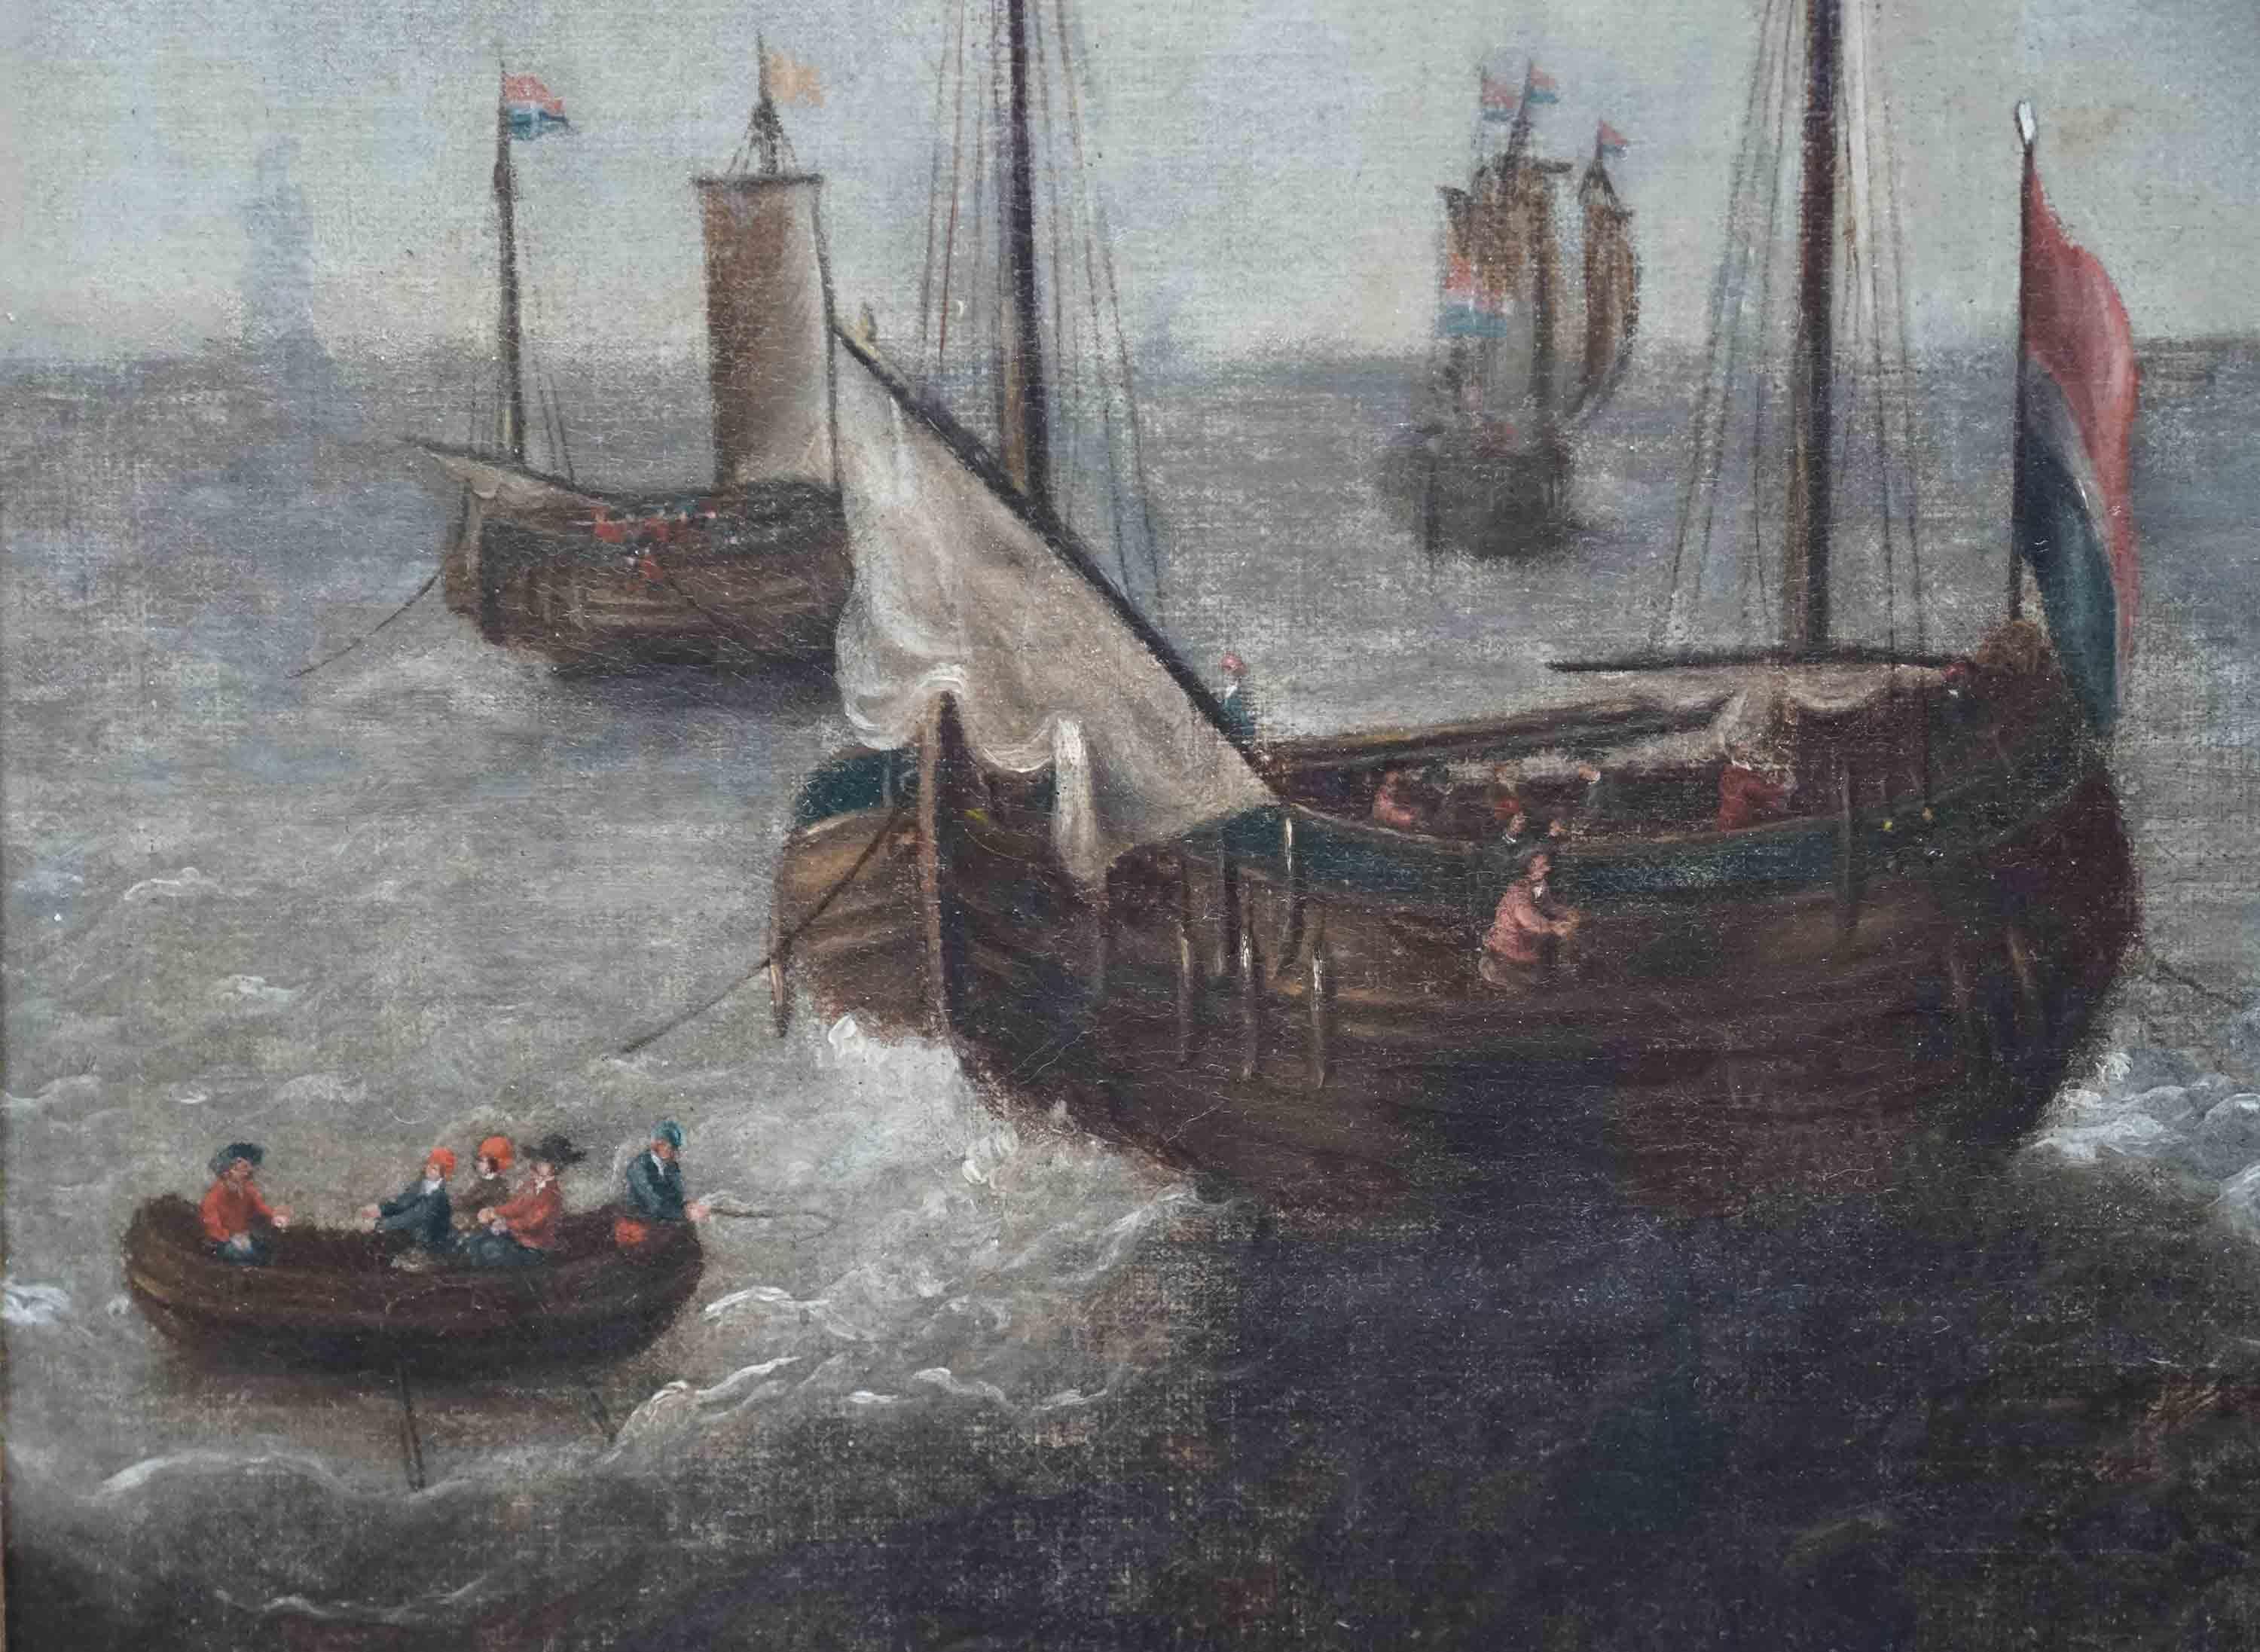 Ships Heading to Sea - Dutch 17th century Old Master marine art oil painting - Old Masters Painting by Abraham Storck